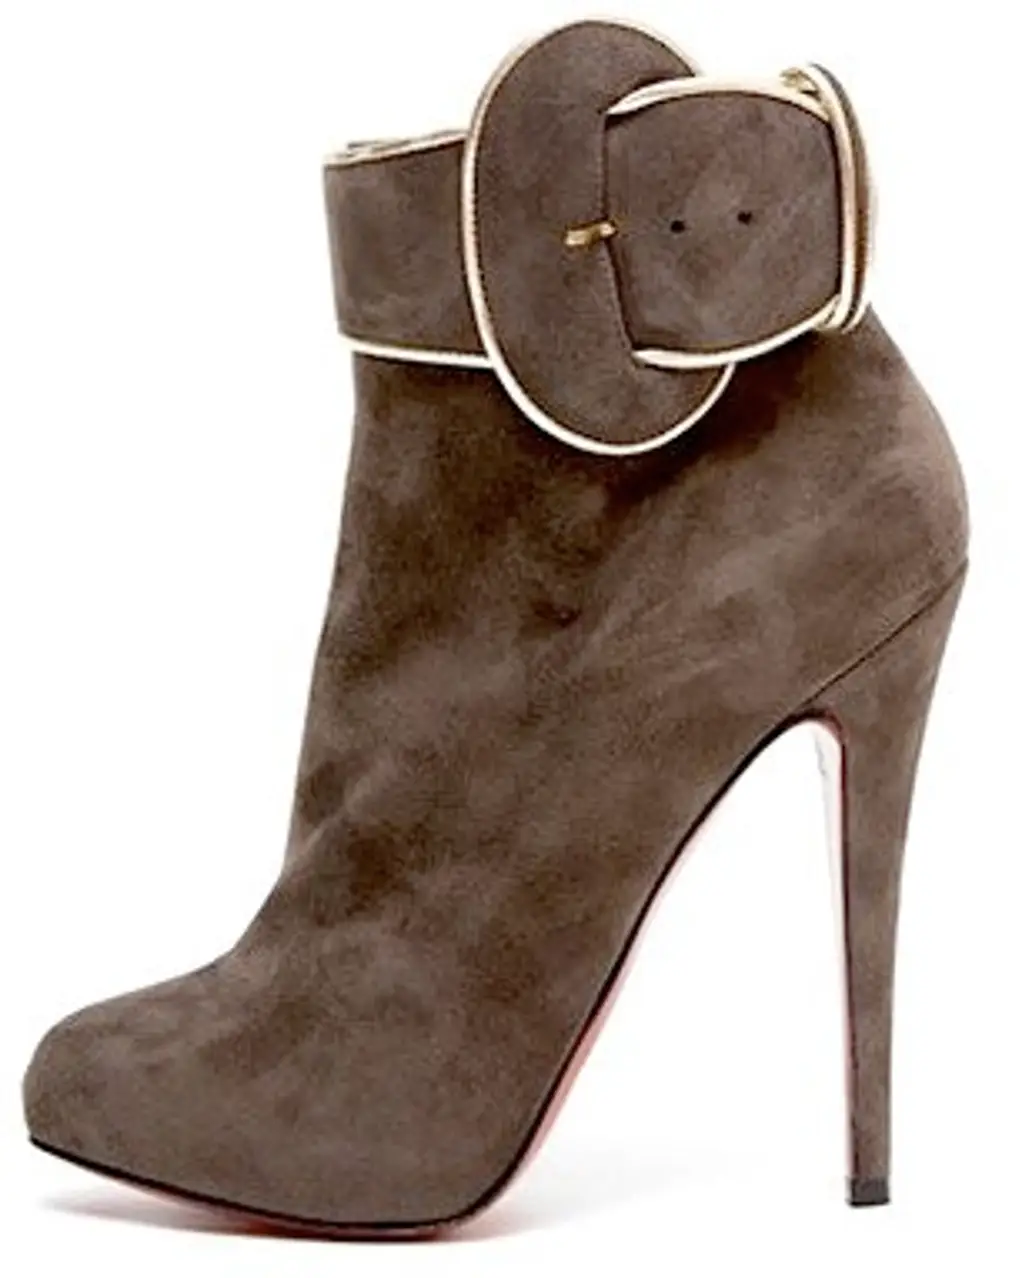 Suede Ankle Boots with Buckle by Christian Louboutin